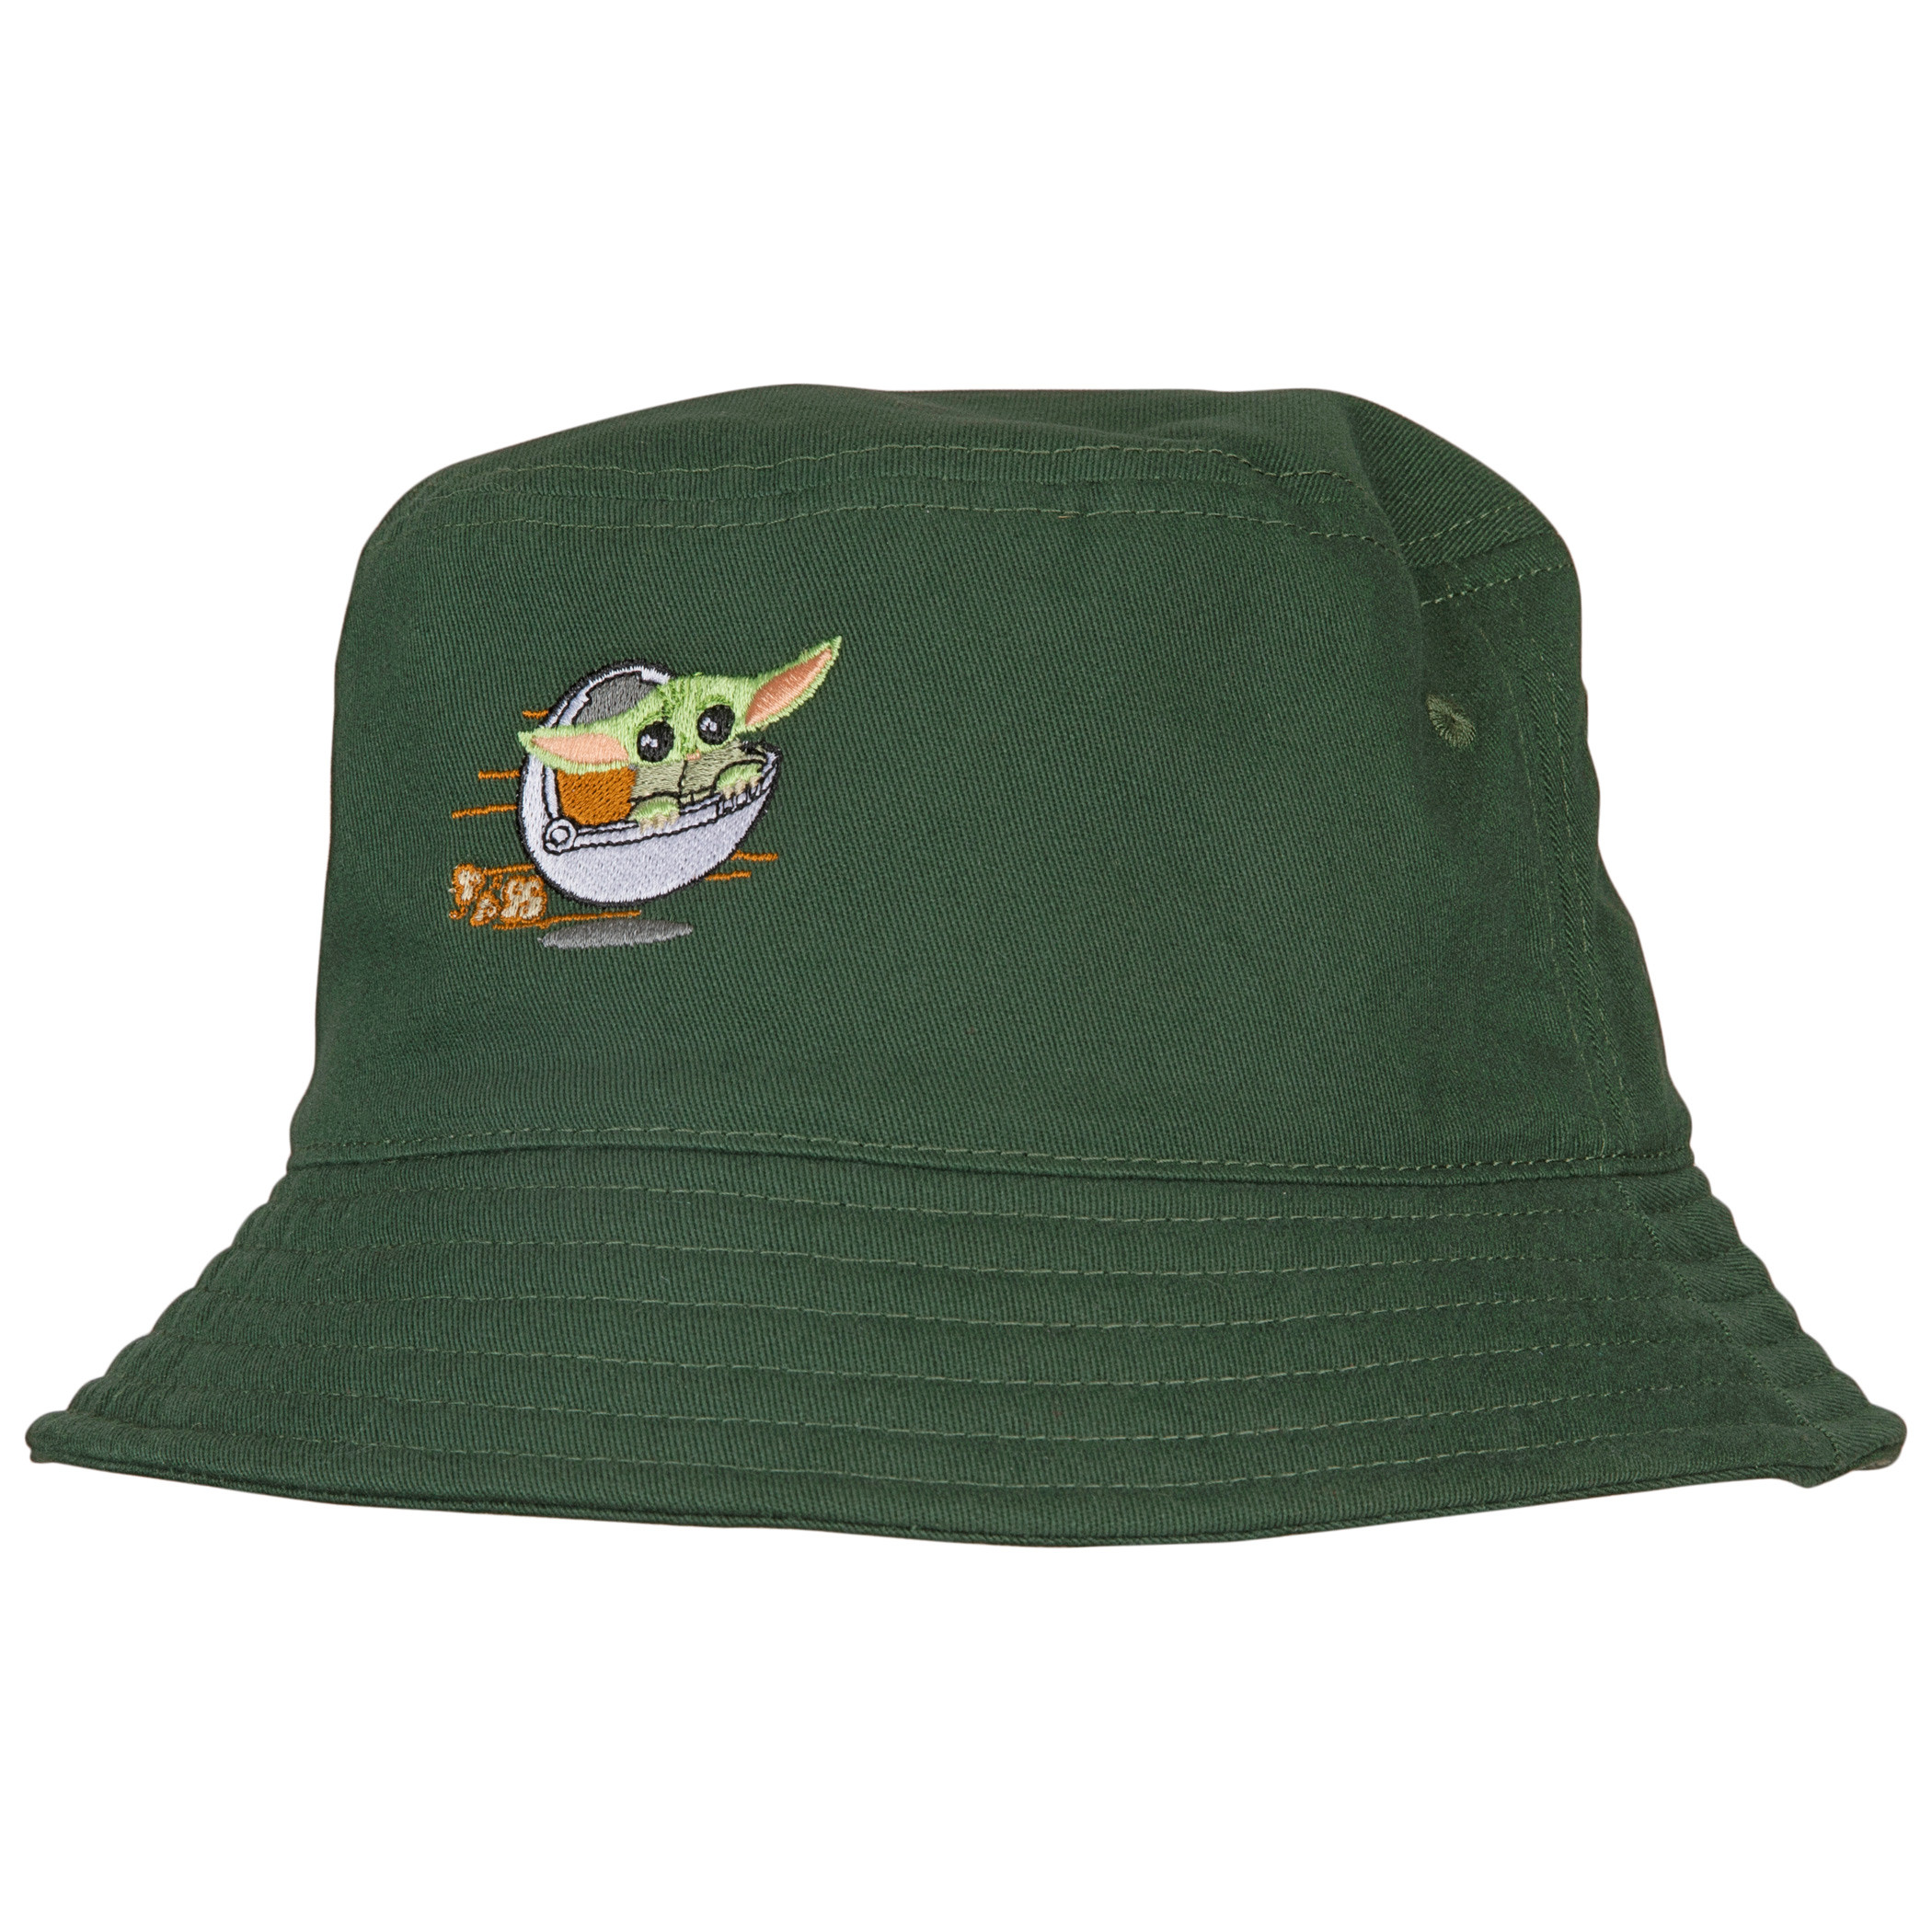 Star Wars The Mandalorian The Child Grogu in Carriage Bucket Hat